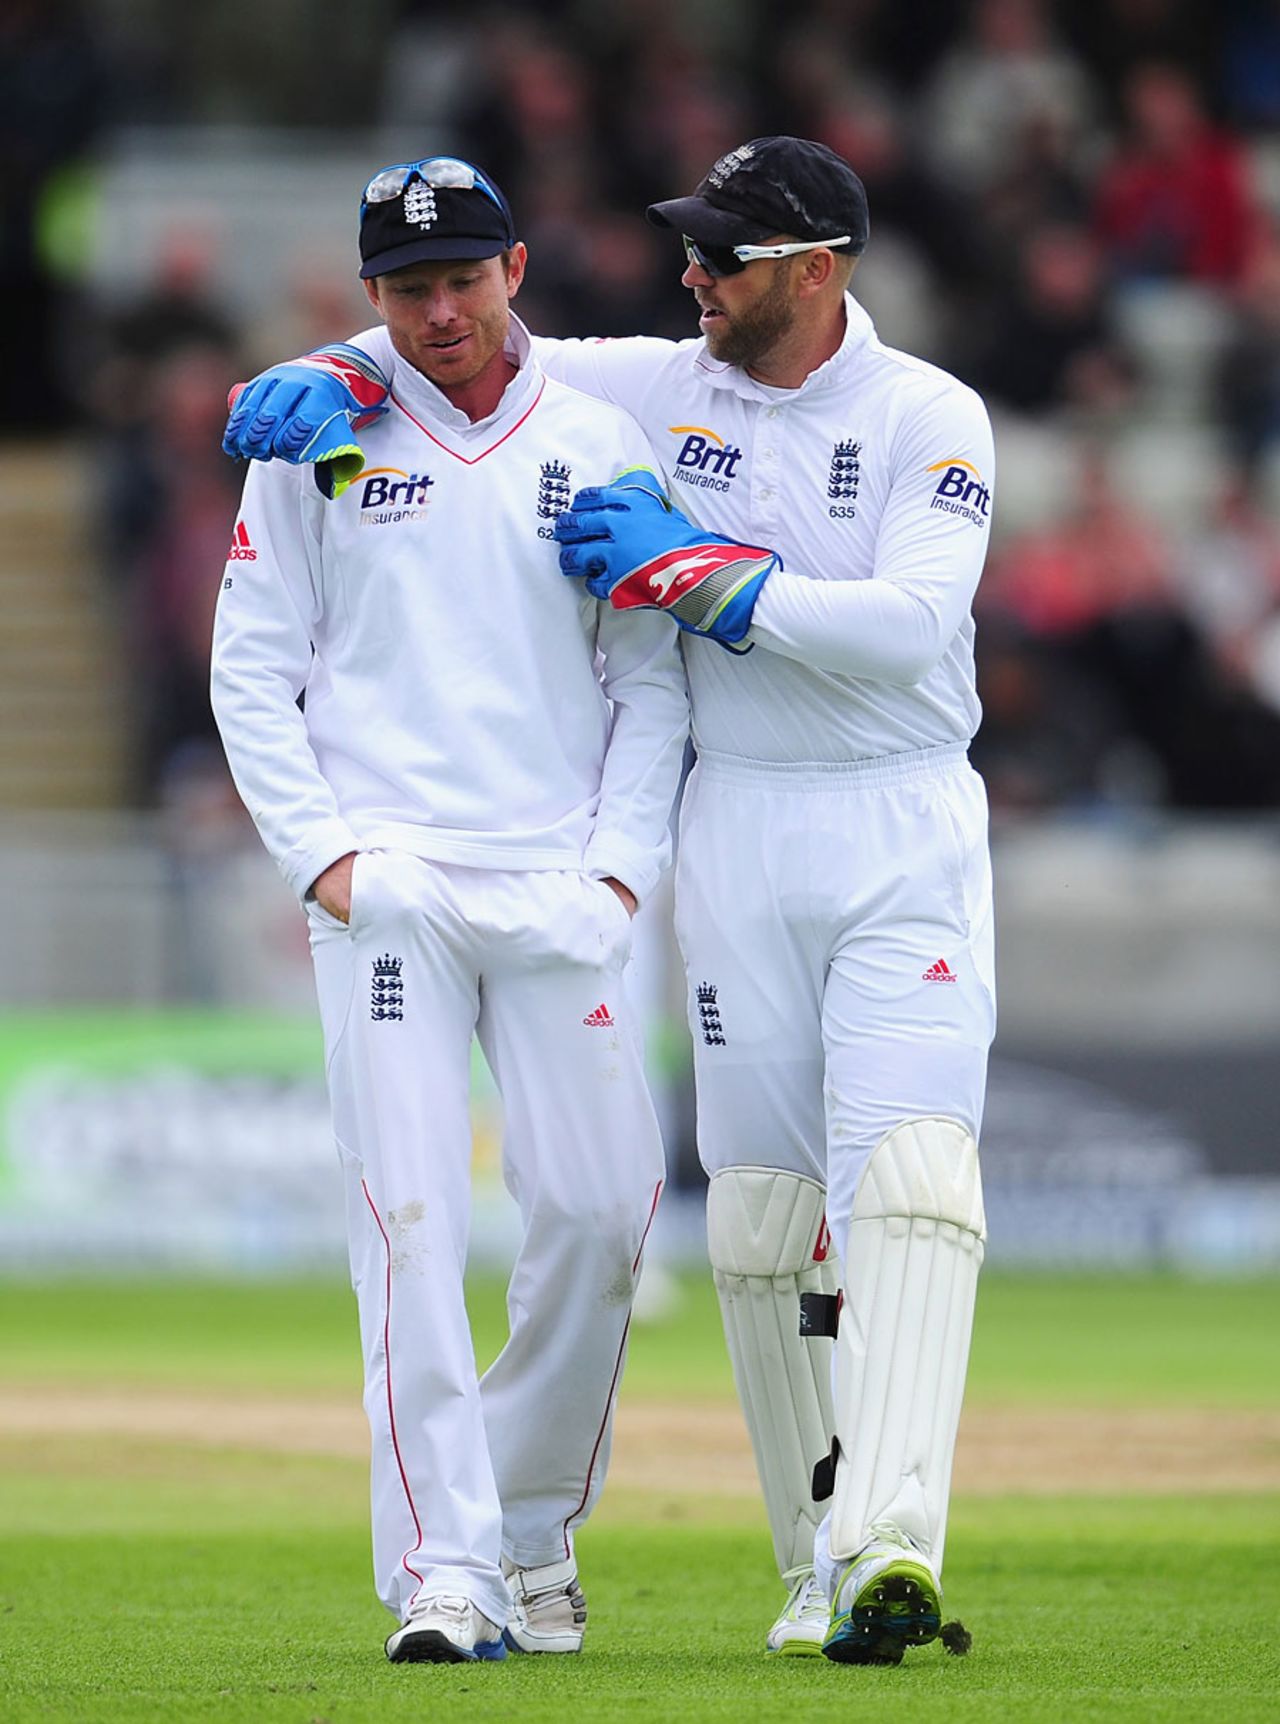 Matt Prior consoles Ian Bell after his second dropped catch, England v West Indies, 3rd Test, Edgbaston, 3rd day, June 9, 2012